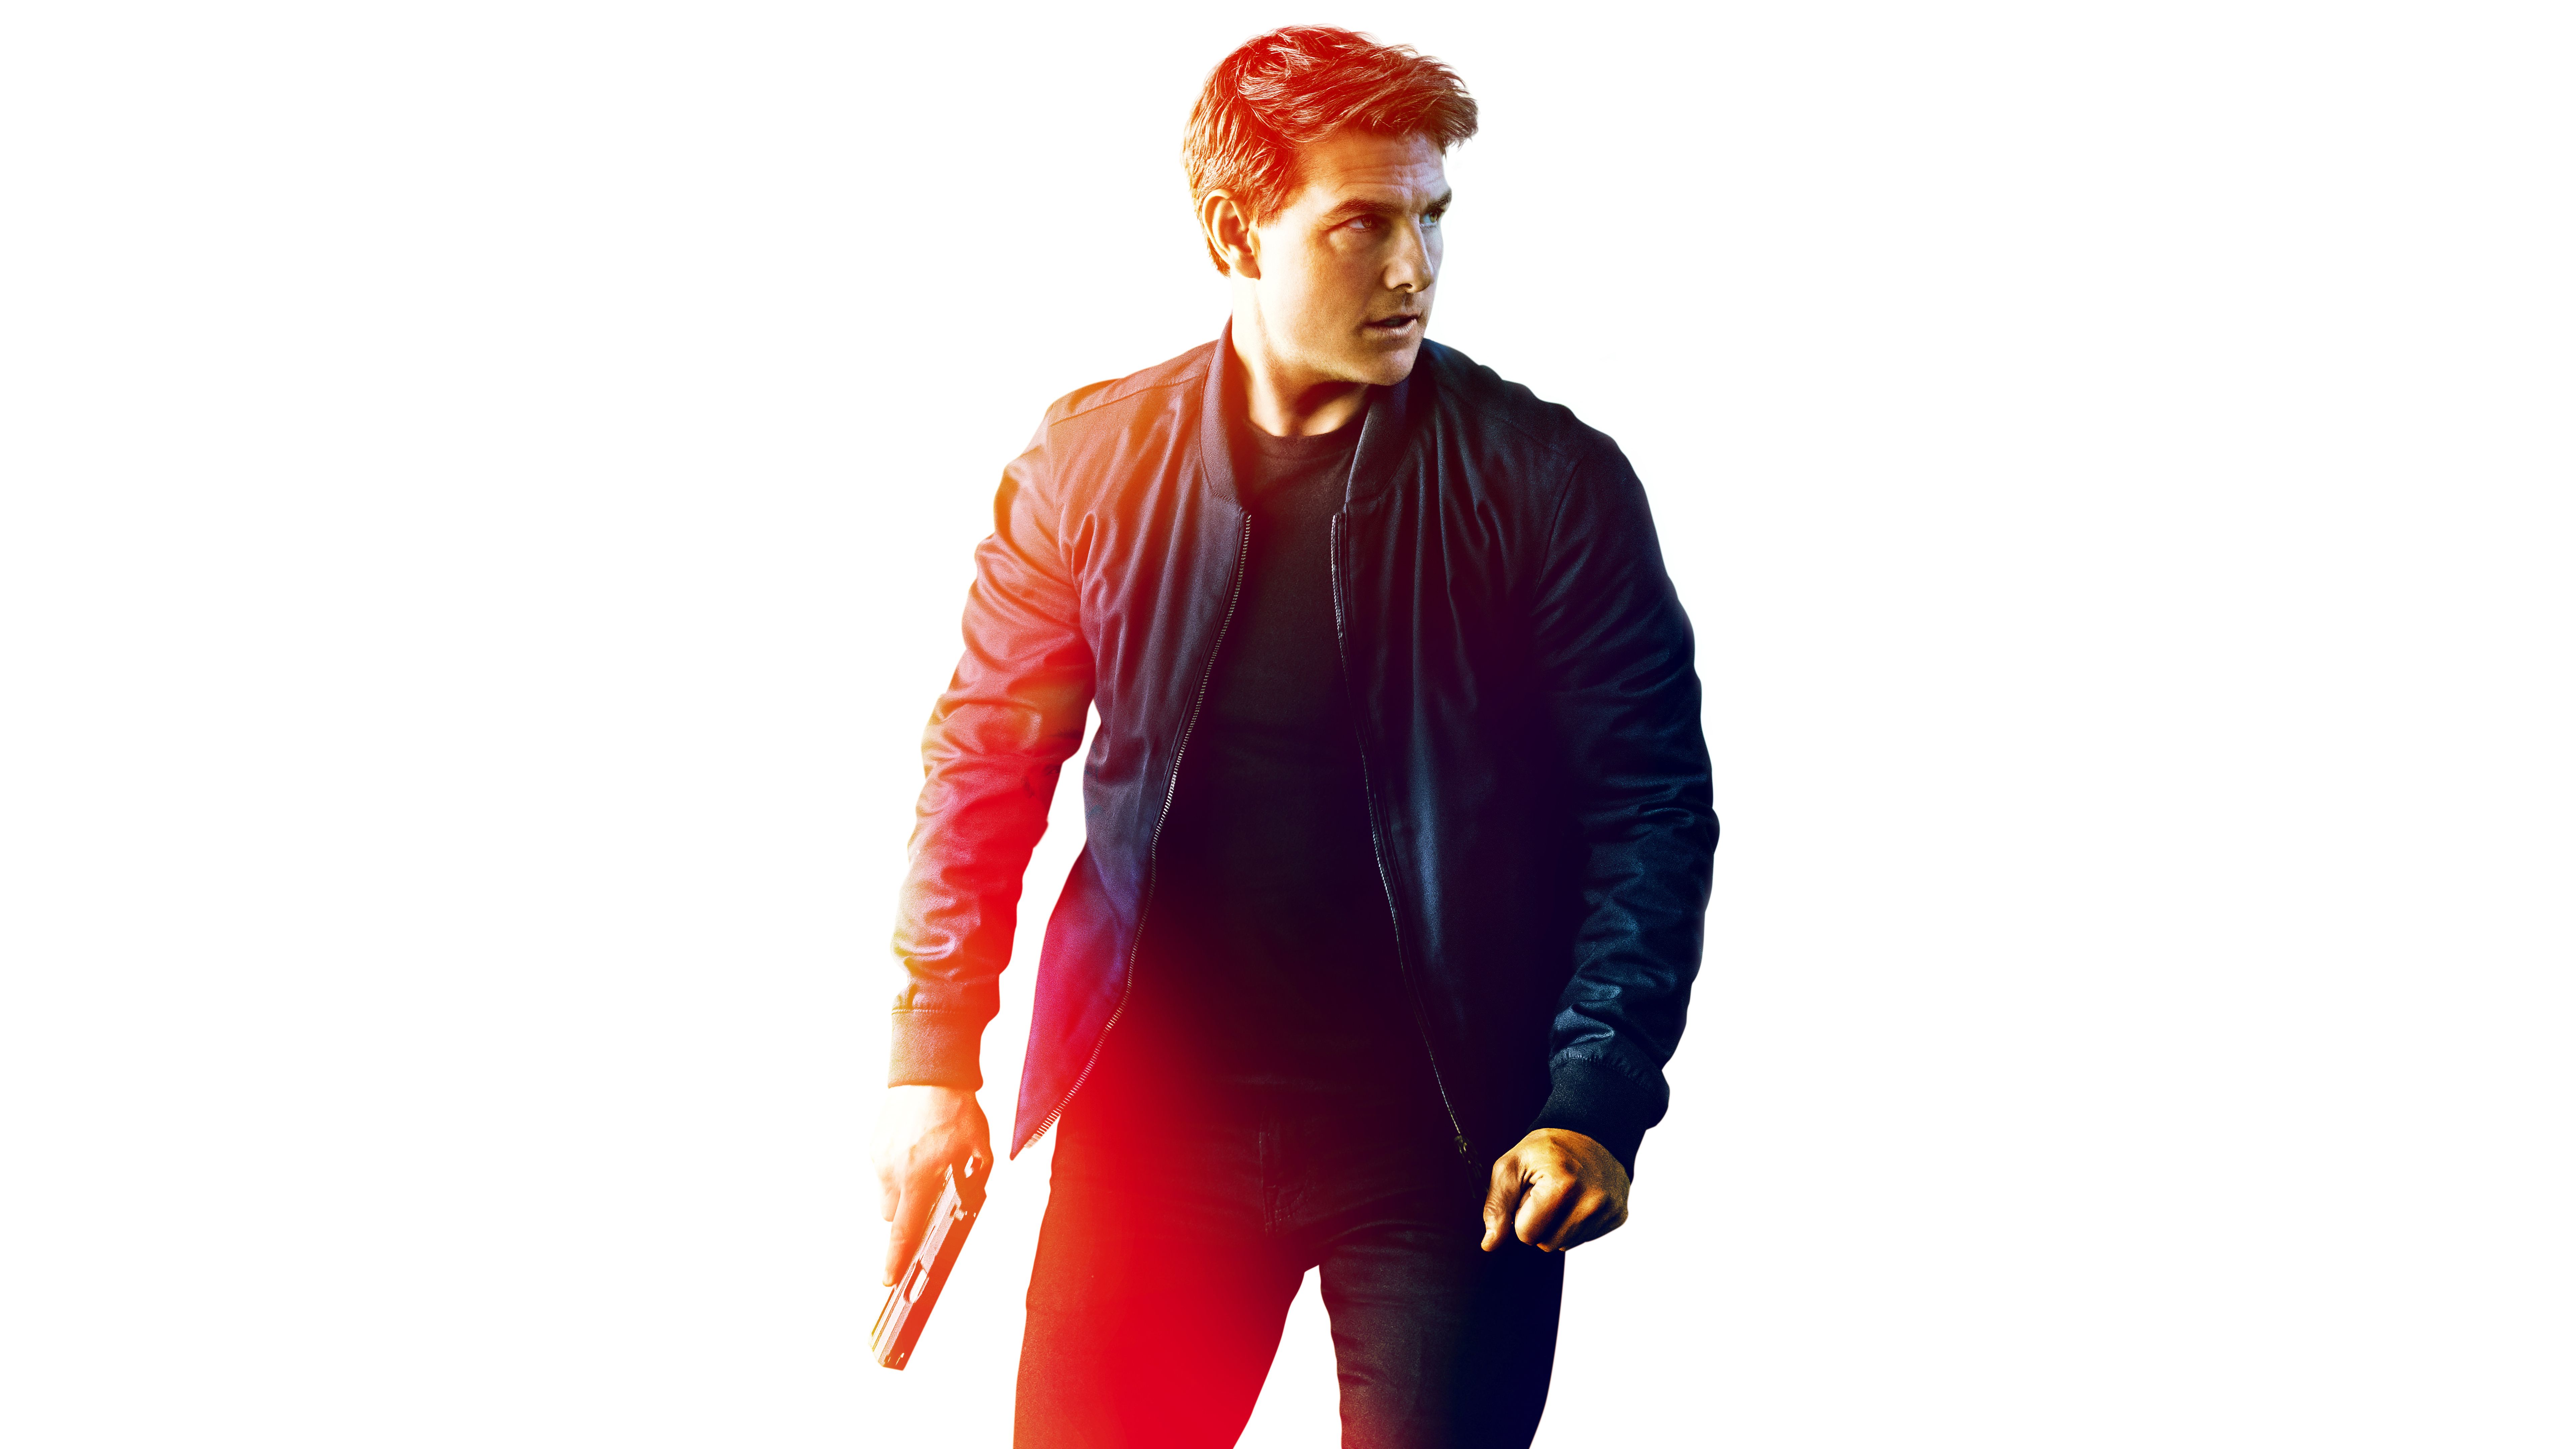 Wallpaper Mission: Impossible, Tom Cruise, 4K, 8K